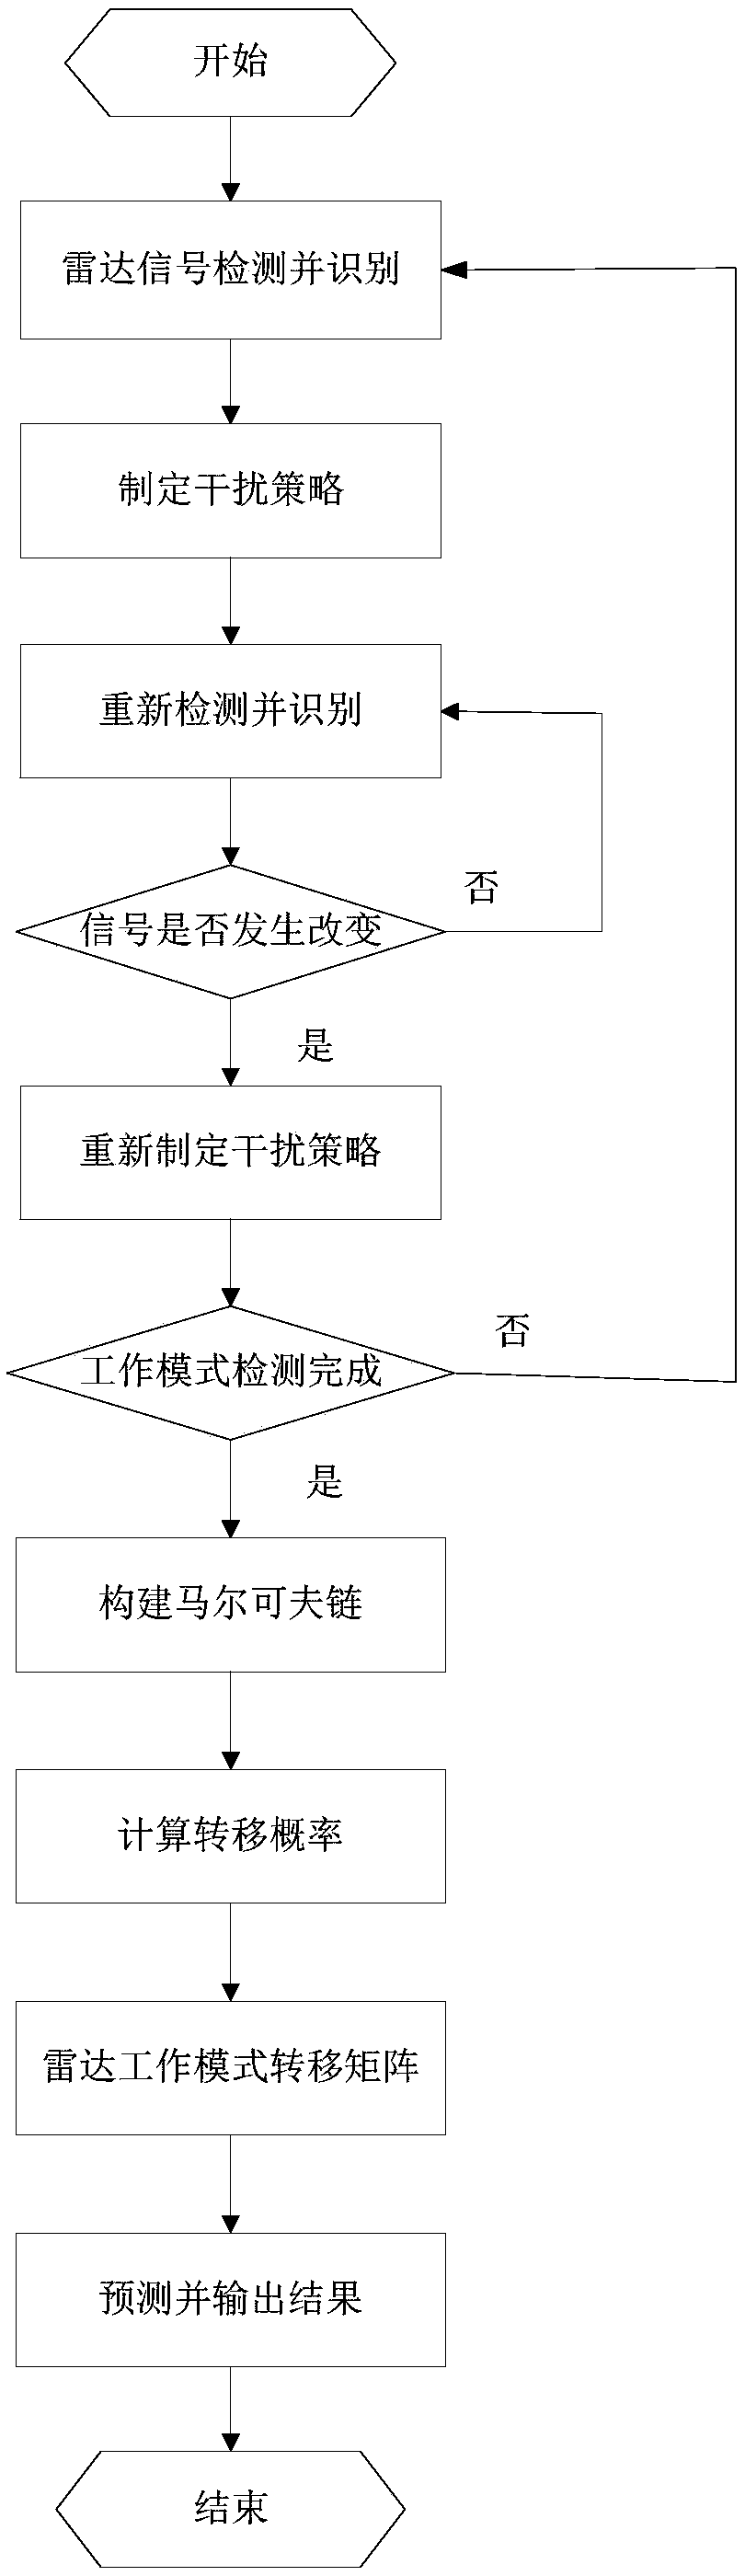 Cognitive interference method based on Markov process decision